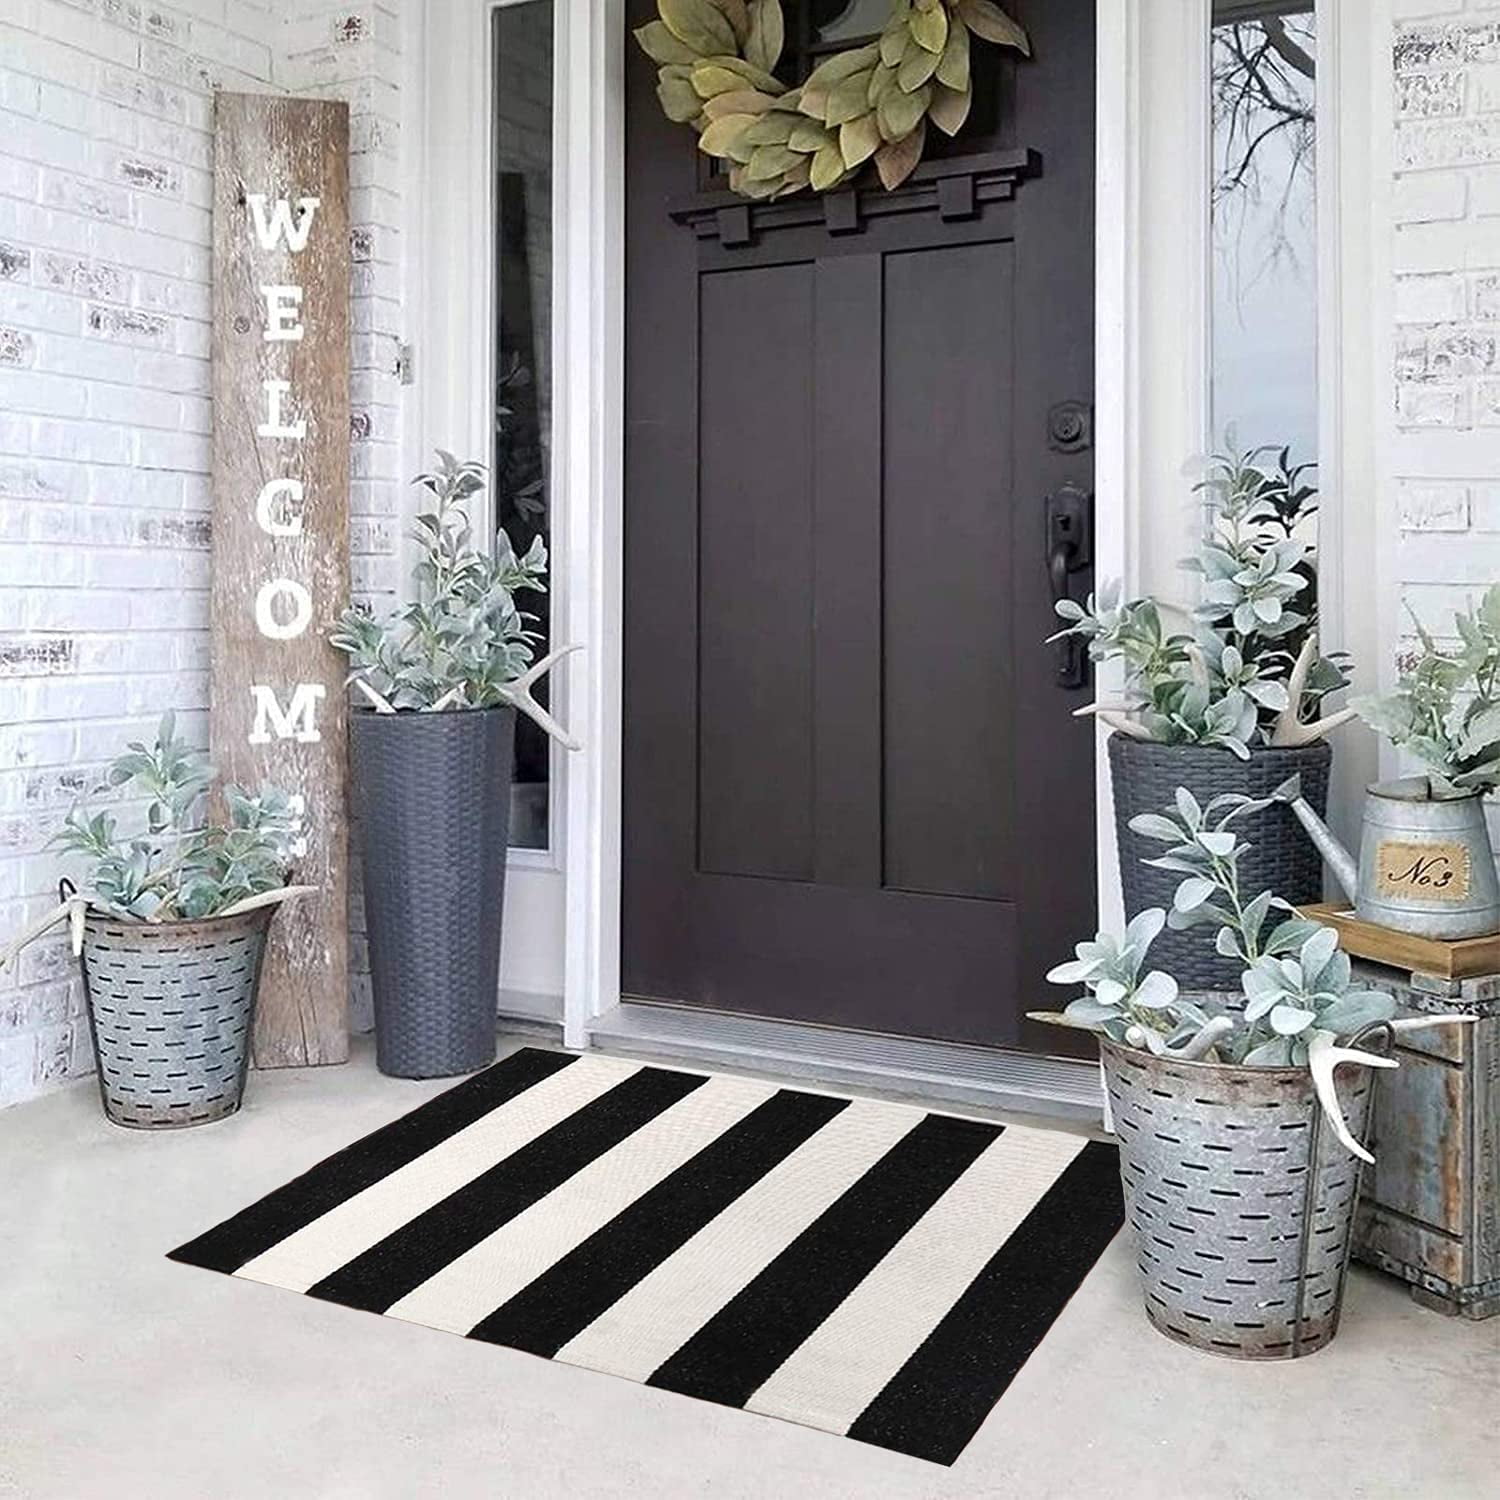 The Original Outdoor Porch Rug 23.6"X35.4" Checkered Door Mat For Layering W/W 